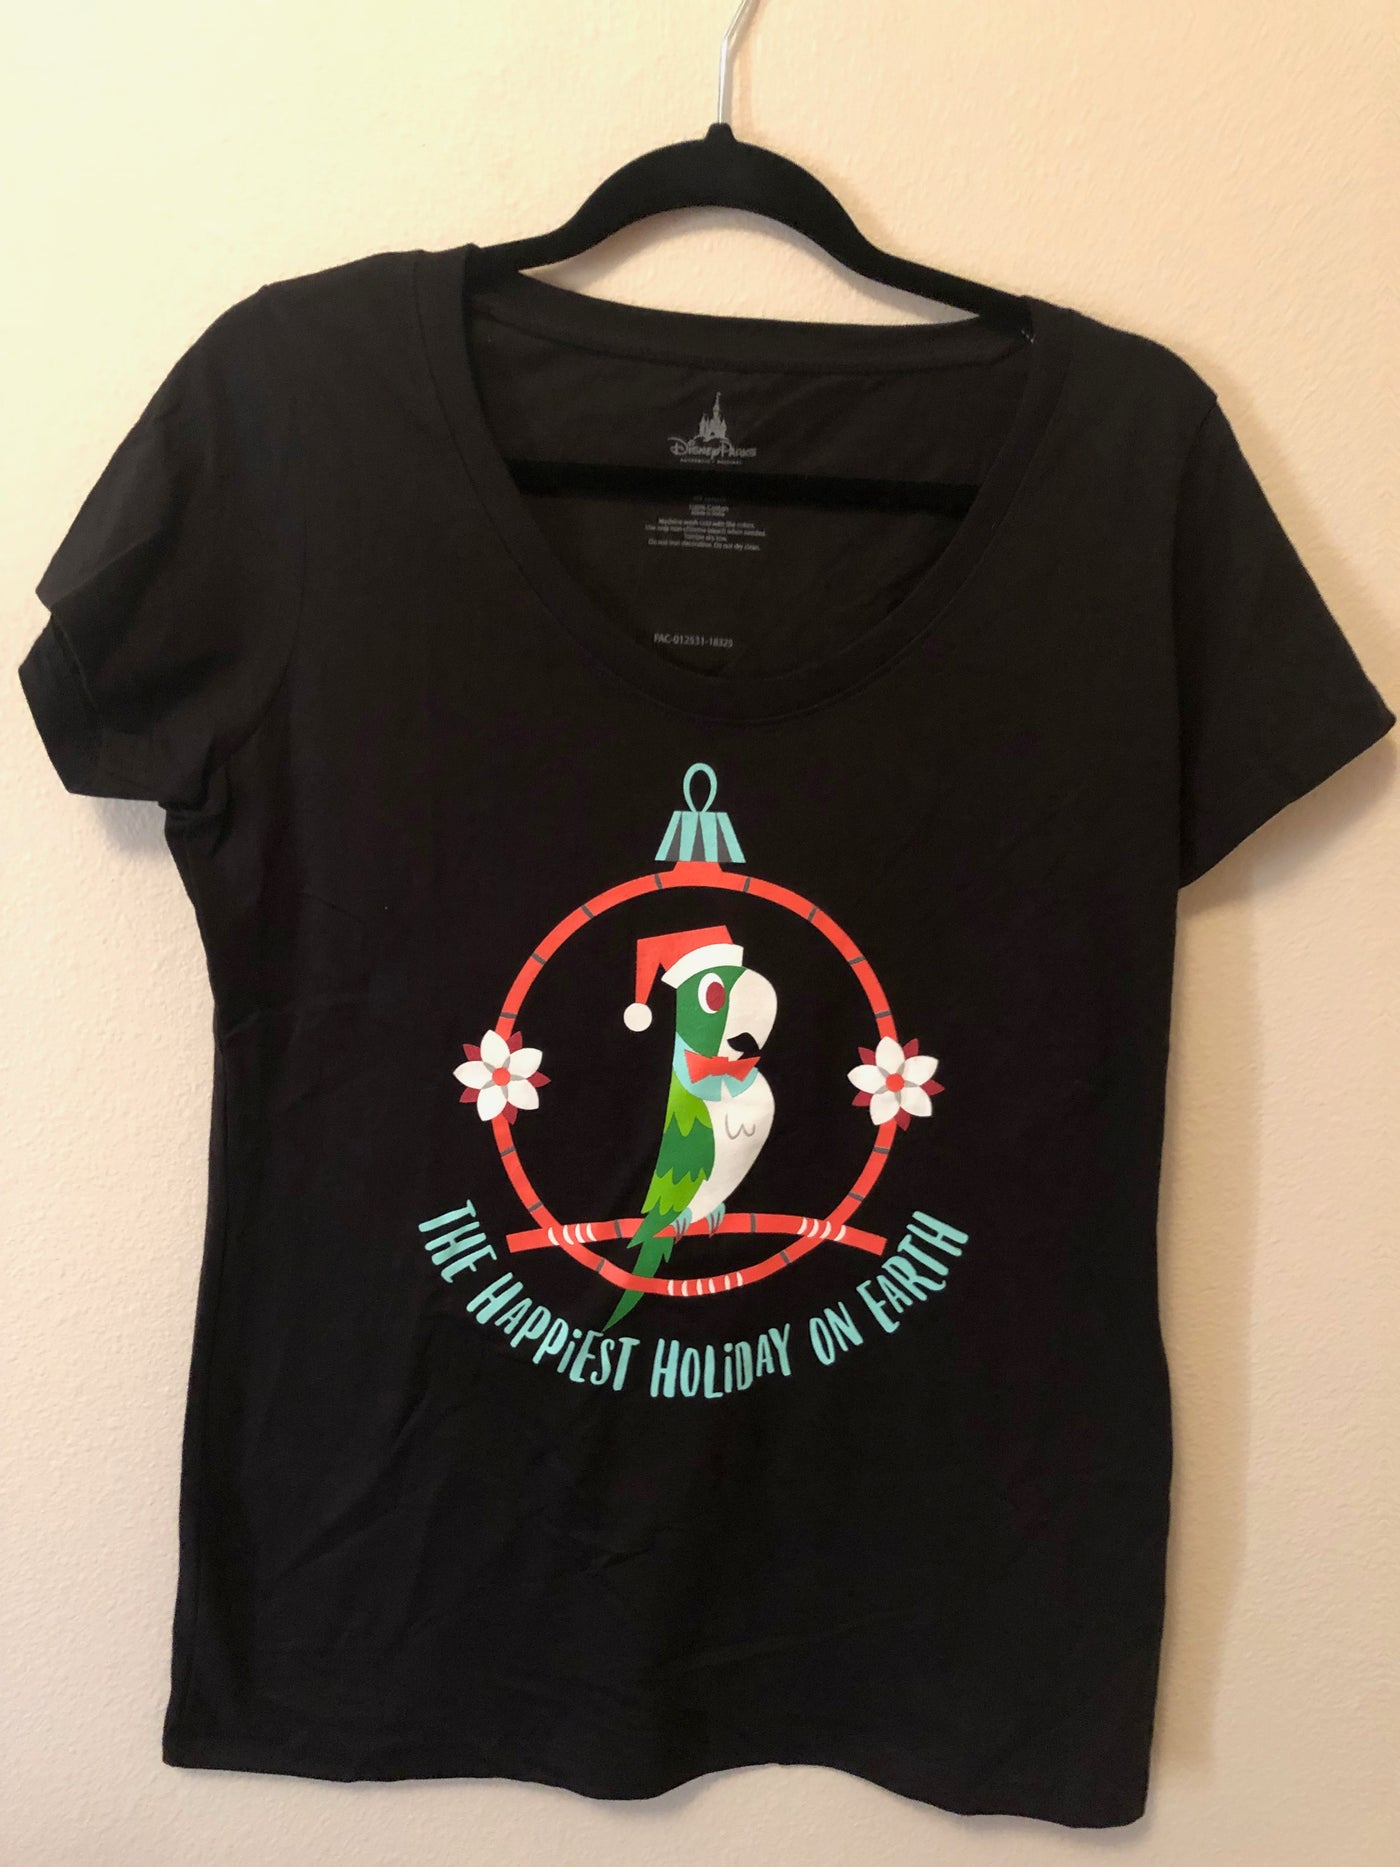 Disney Holiday The Happiest Holiday on Heart Women's T-Shirt Small New w Tag